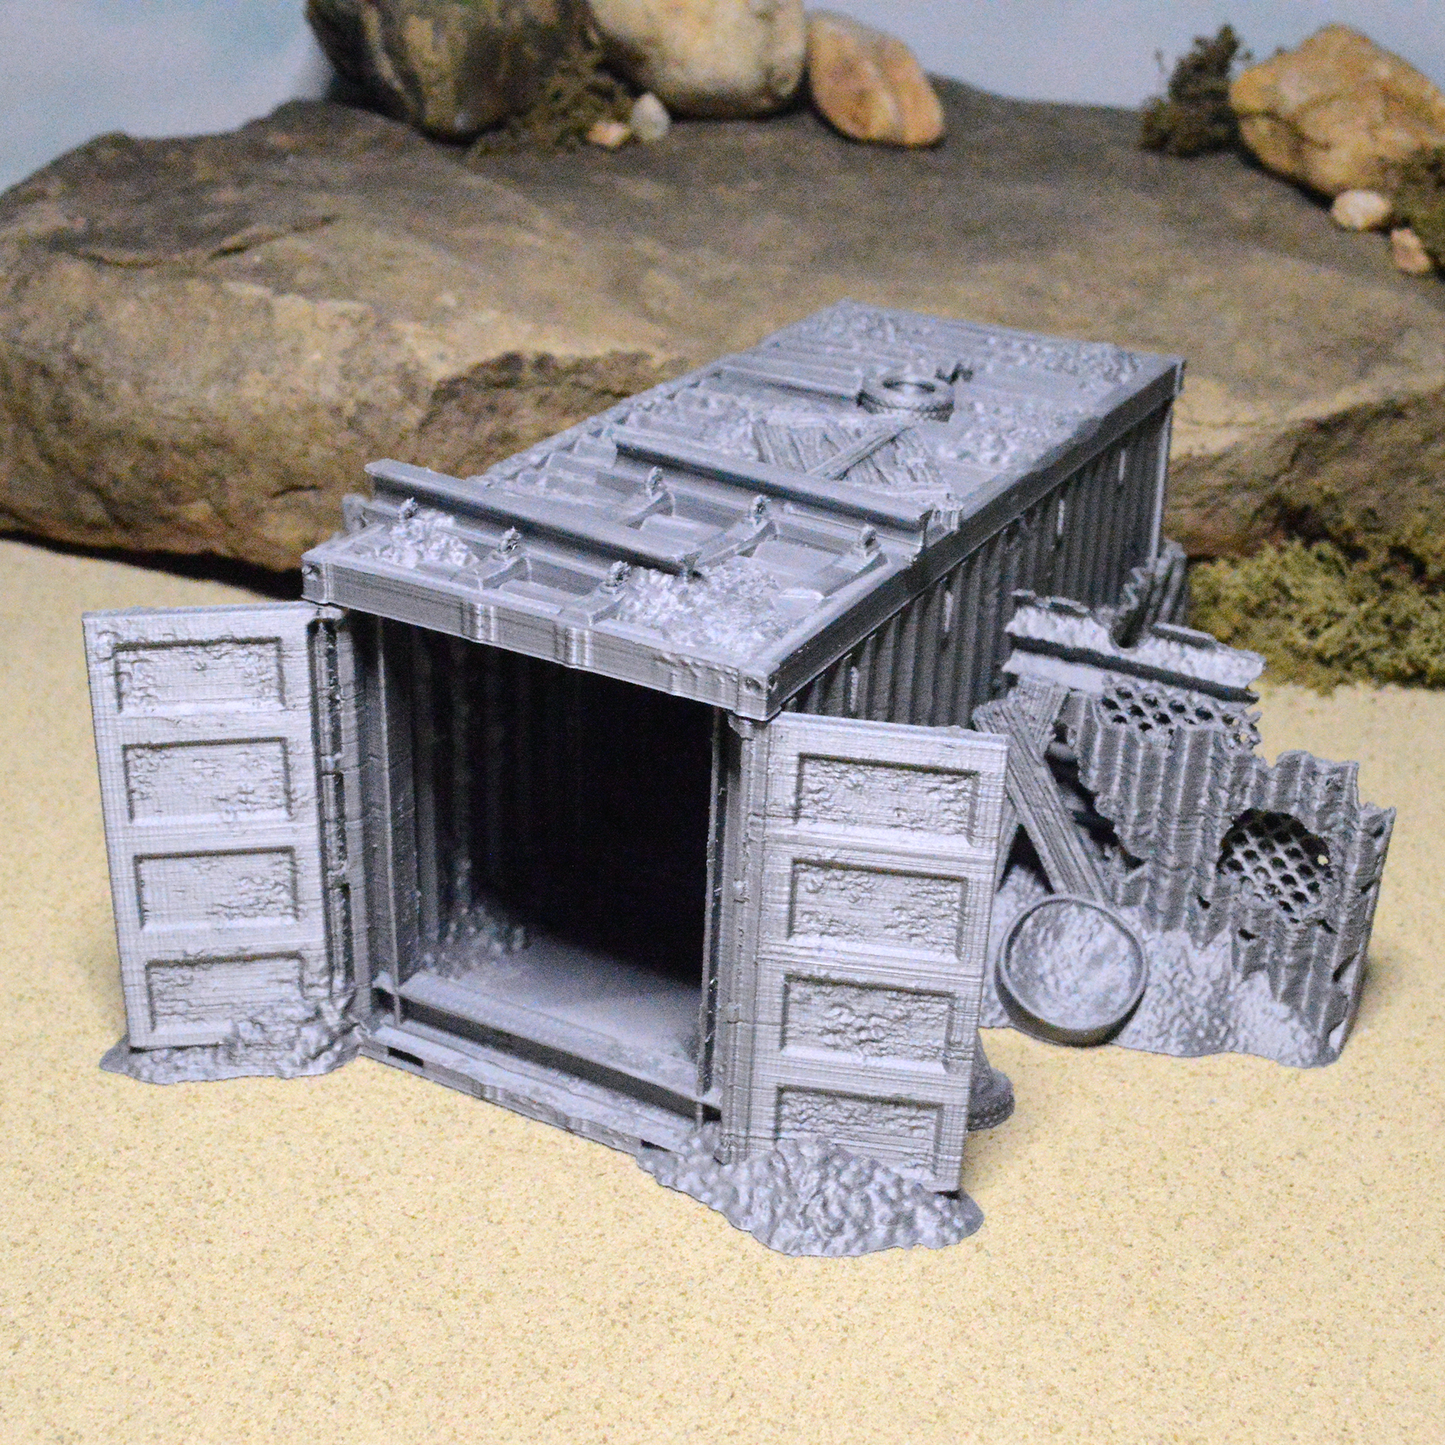 Junkfort Foot Entrance 15mm 20mm 28mm 32mm for Gaslands Terrain, Fallout Urban Apocalyptic Shipping Container Tunnel, This is Not a Test